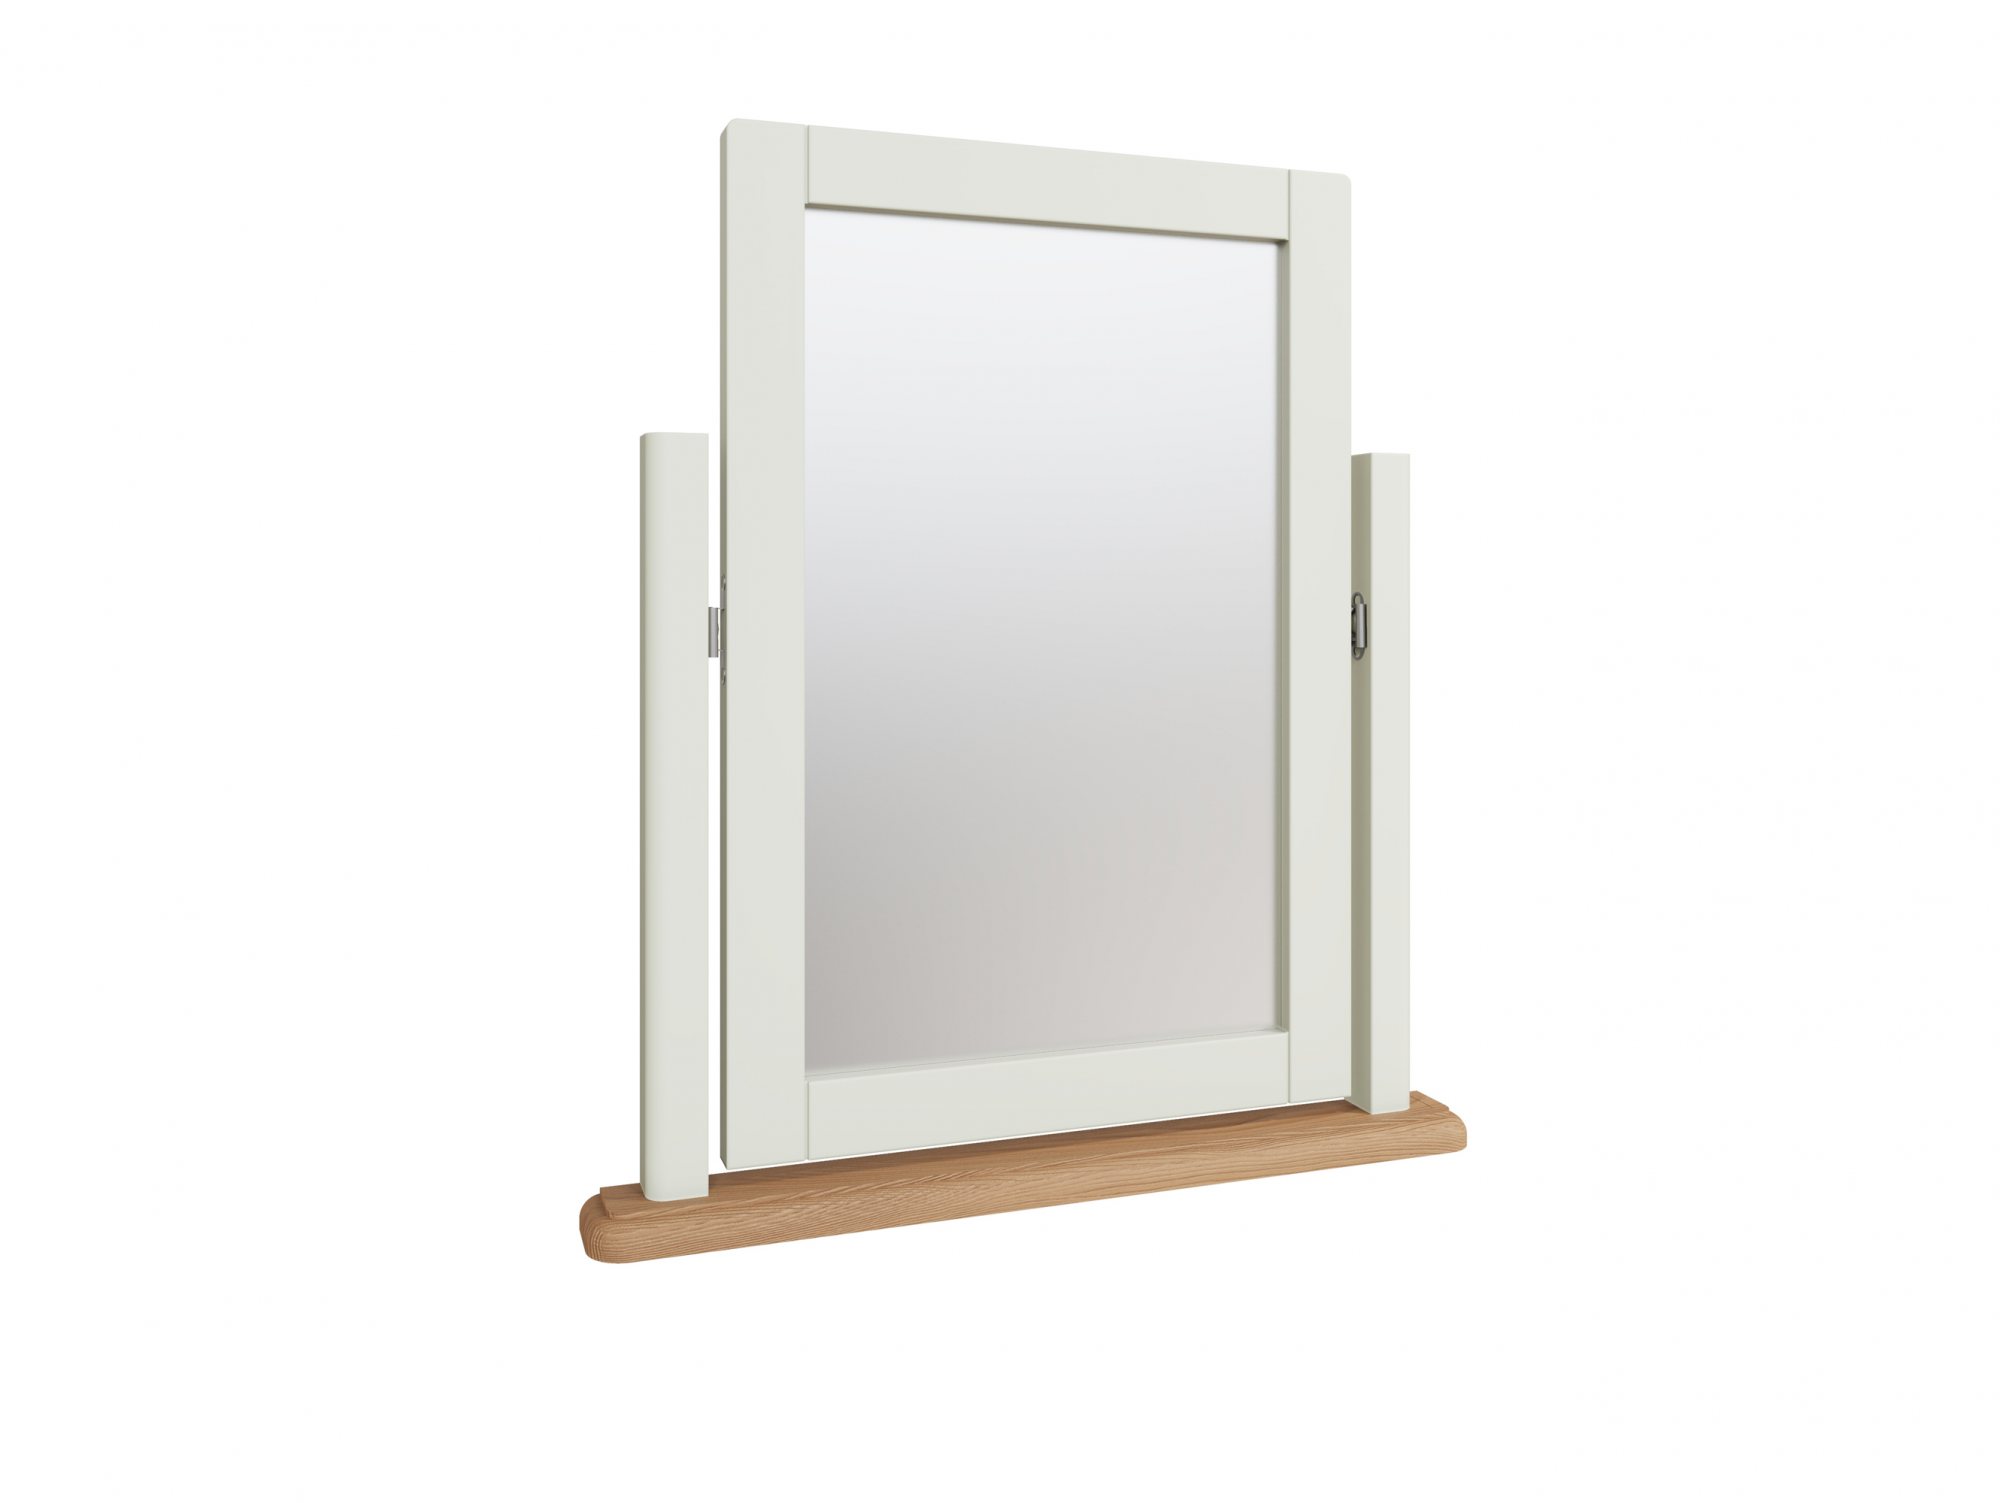 Kenmore Kenmore Patterdale White Wooden Dressing Table Mirror